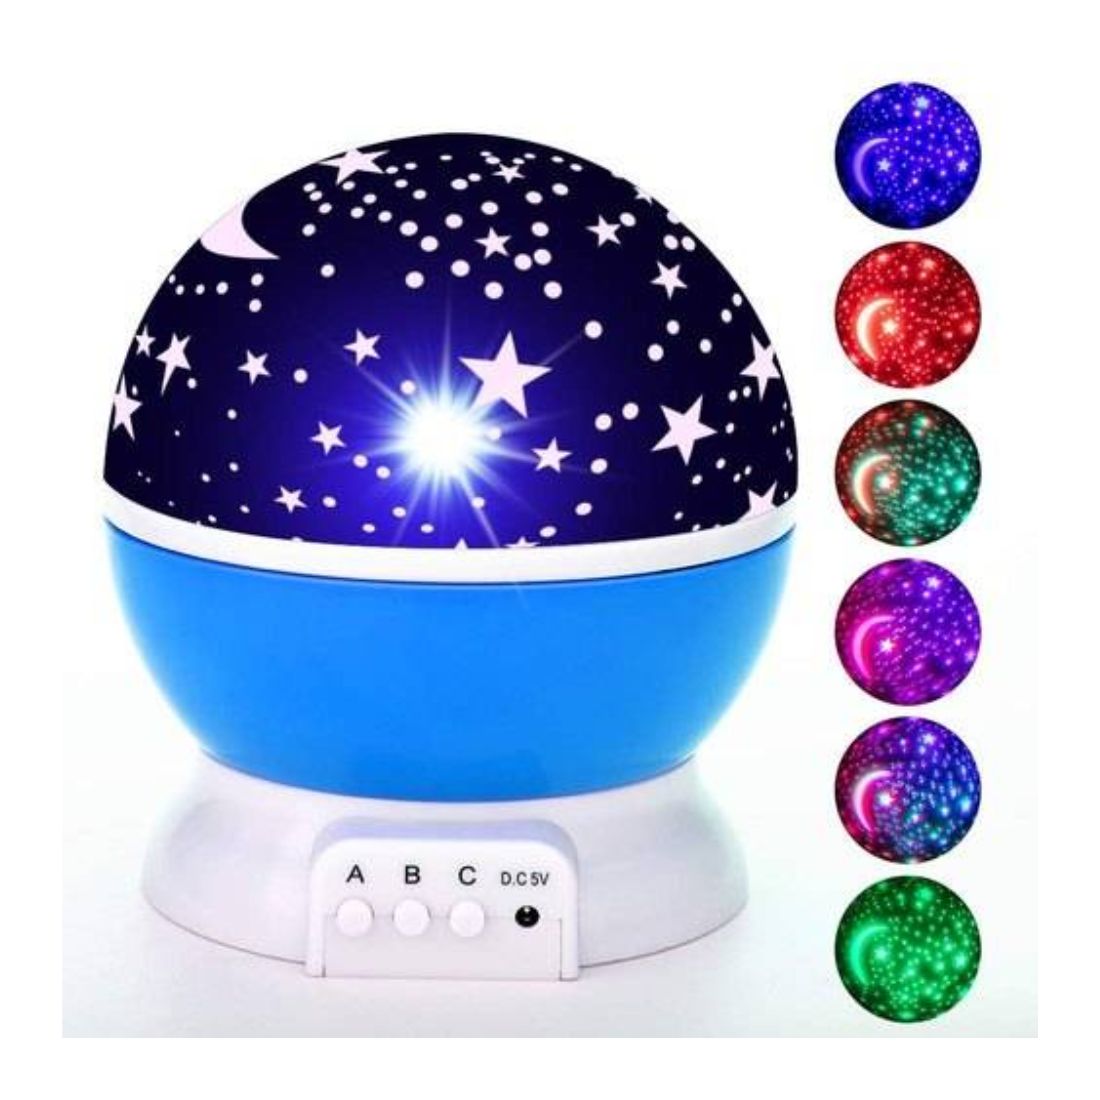 Big Star Master 360-Degree Rotating Moonlight Projector - Color-Changing Night Light for Kids Room